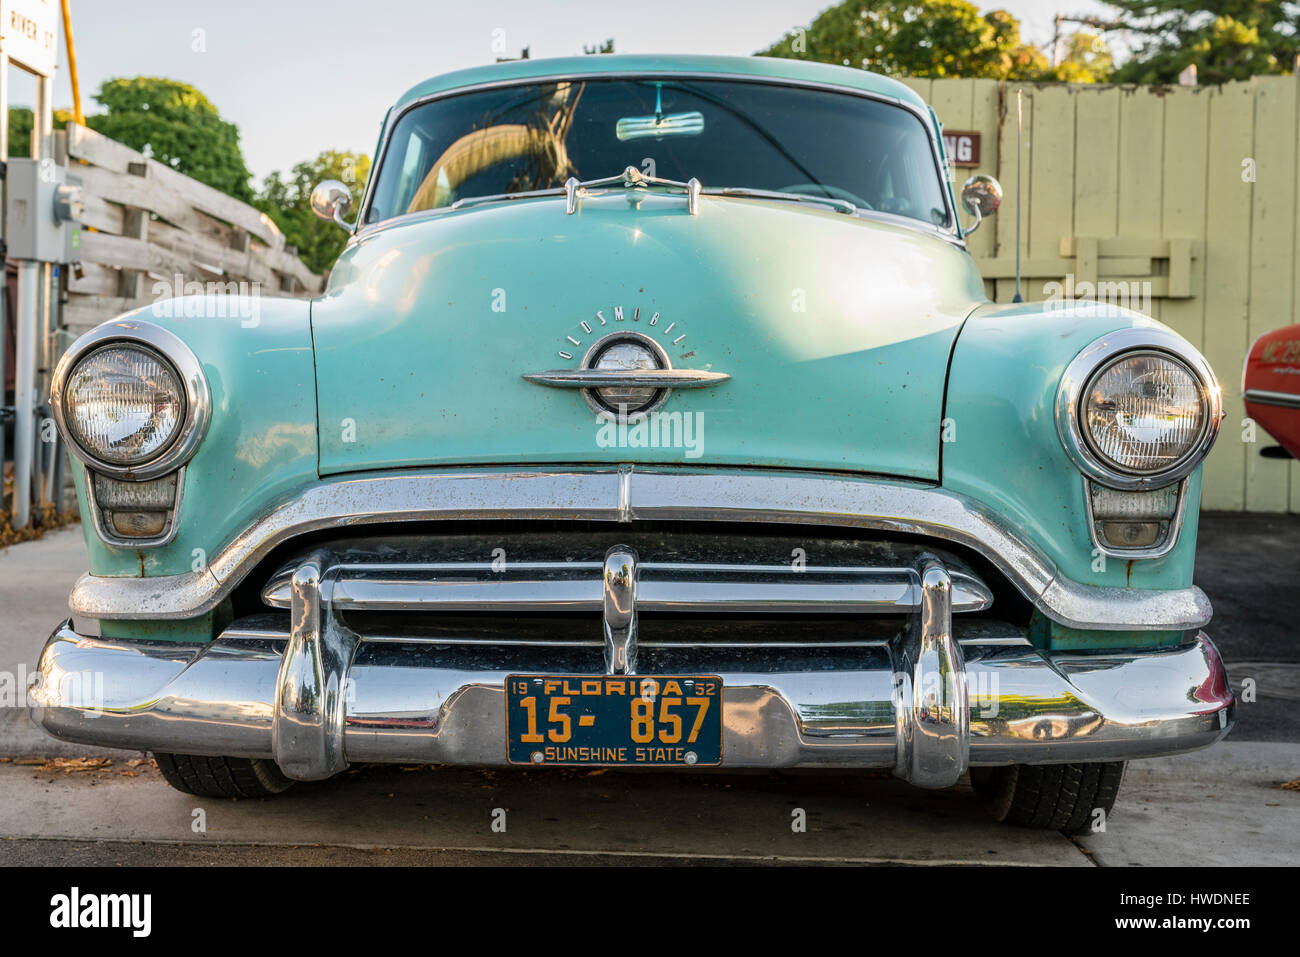 Leland, Michigan, August 8, 2016: 1952 Oldsmobile 88. Front view Stock Photo